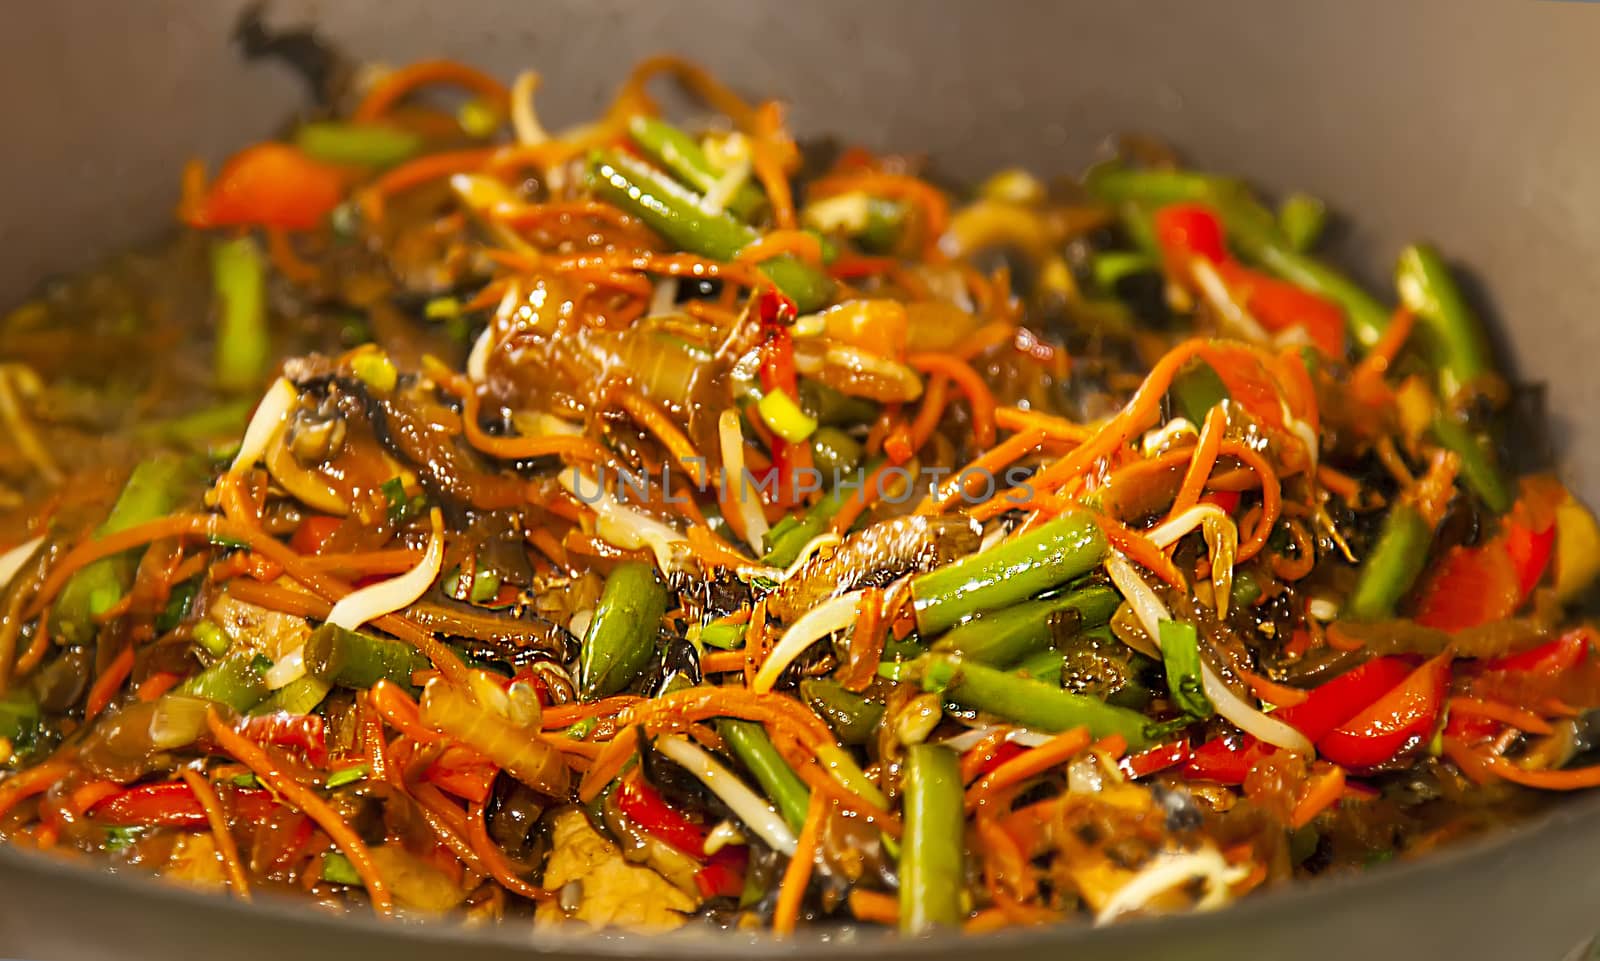 Asian noodles with vegetables on wok by RawGroup